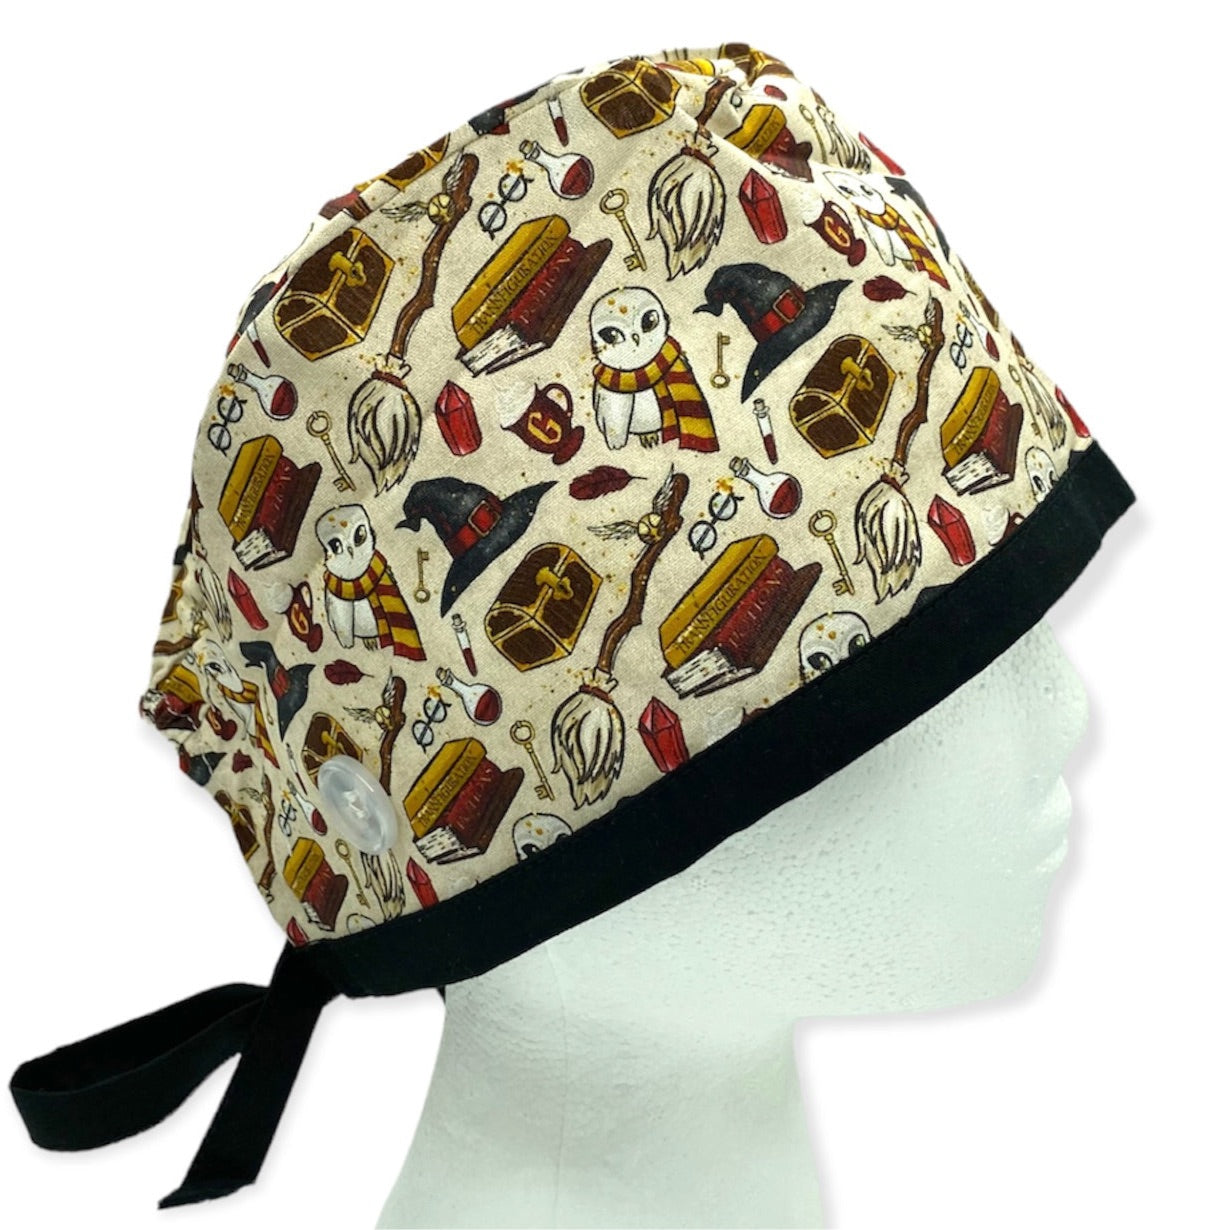 wizard magic and owl surgical scrub cap with ear buttons and satin lining. Best scrub hats for men and women